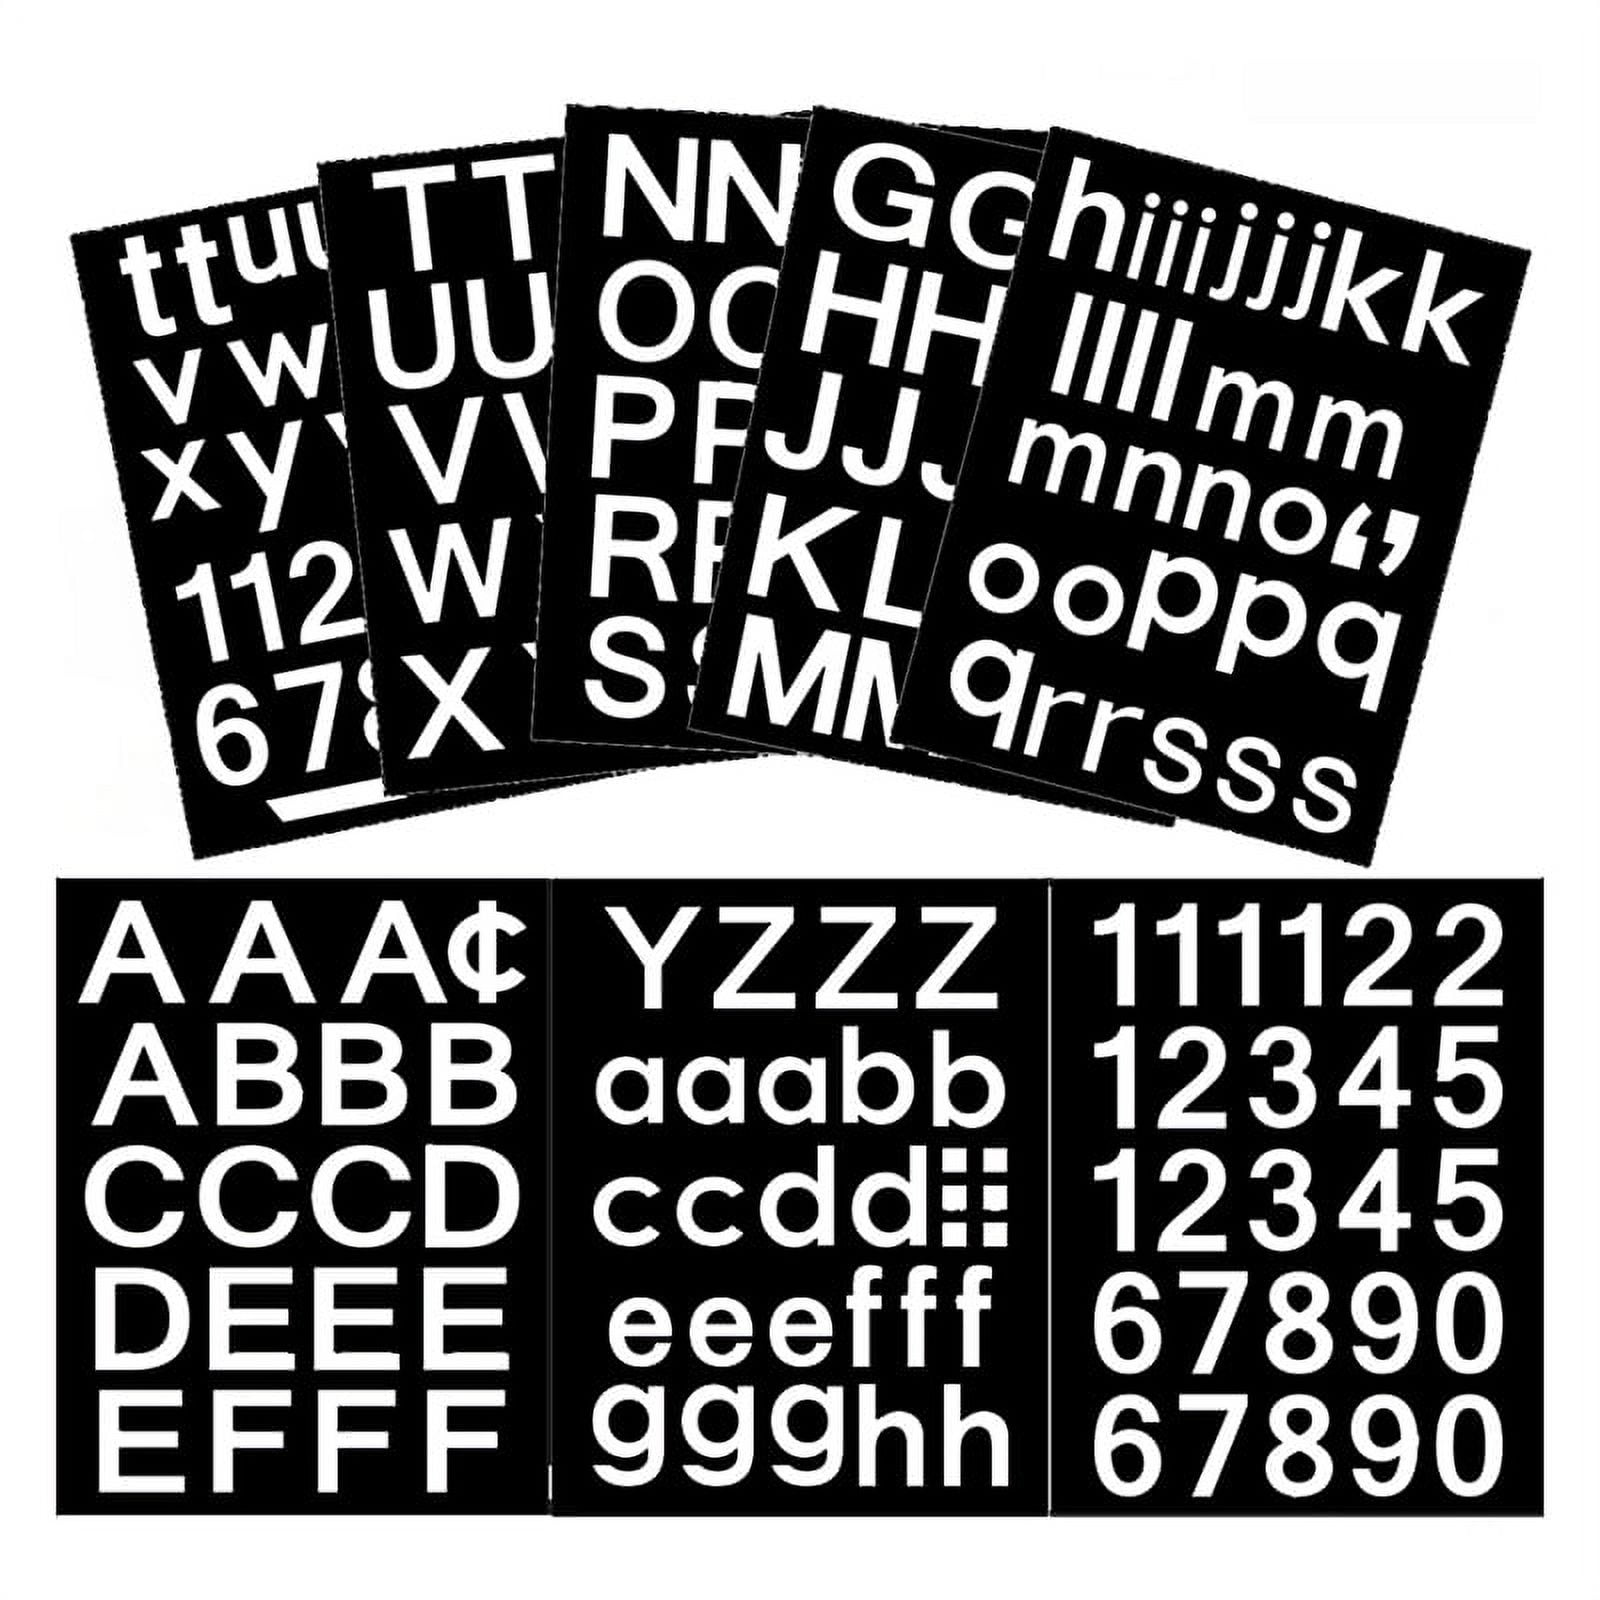  10 Sheet Small Letter Stickers, 1/2 Inch Self Adhesive Alphabet  Stickers, Cute Vinyl Letter Stickers for Arts Crafts Outdoor Sign Poster  Windows Doors Mailboxes Car Truck - Colorful